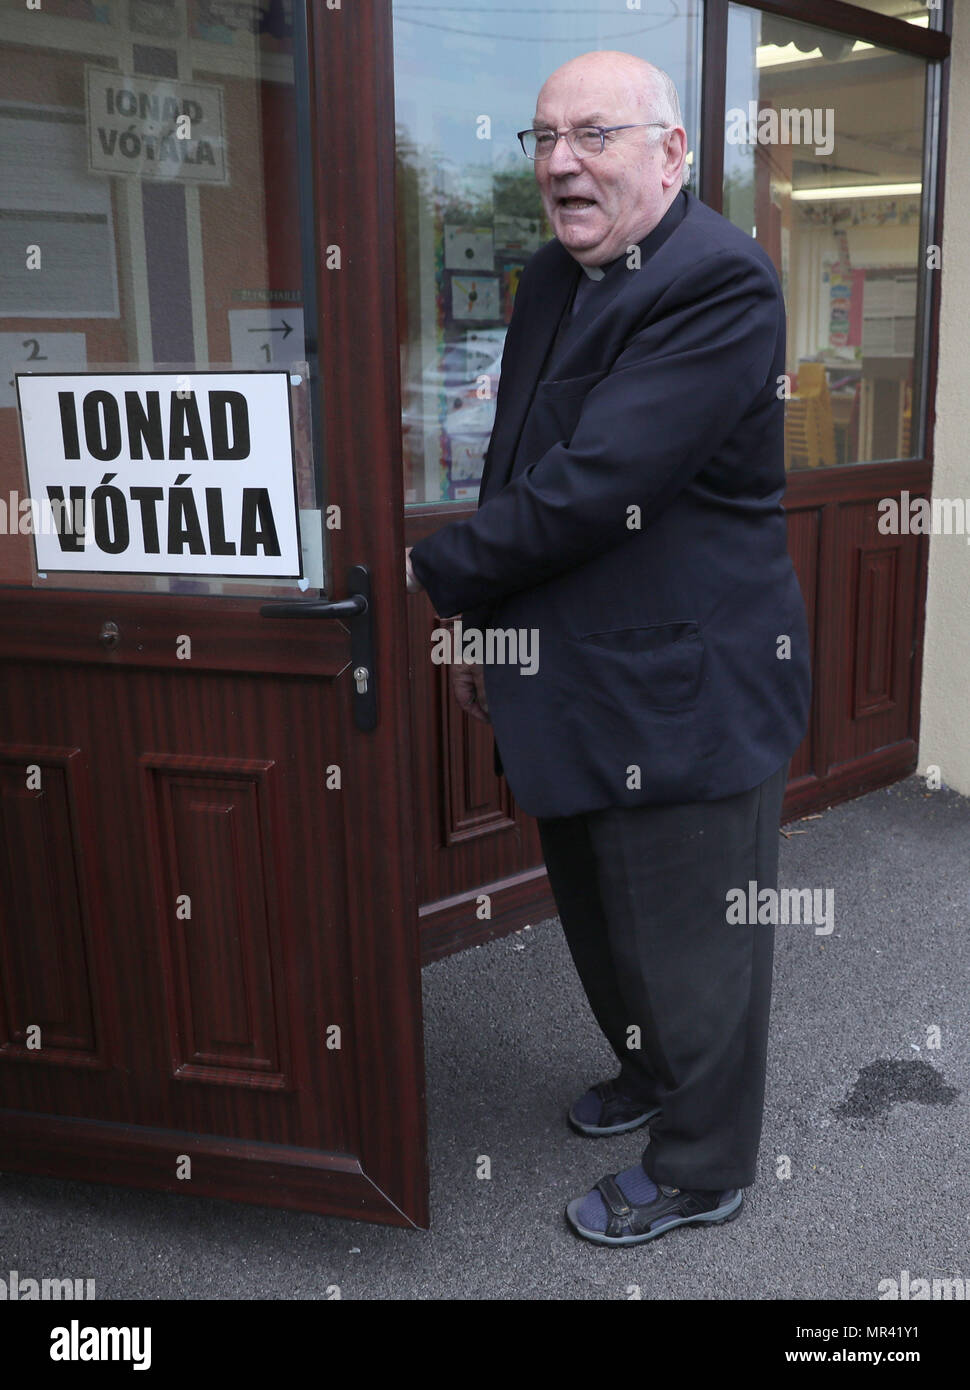 Father Tom Harrington arrives at the polling station in Knock National  school, Mayo, as the country goes to the polls to vote in the referendum on  the 8th Amendment of the Irish